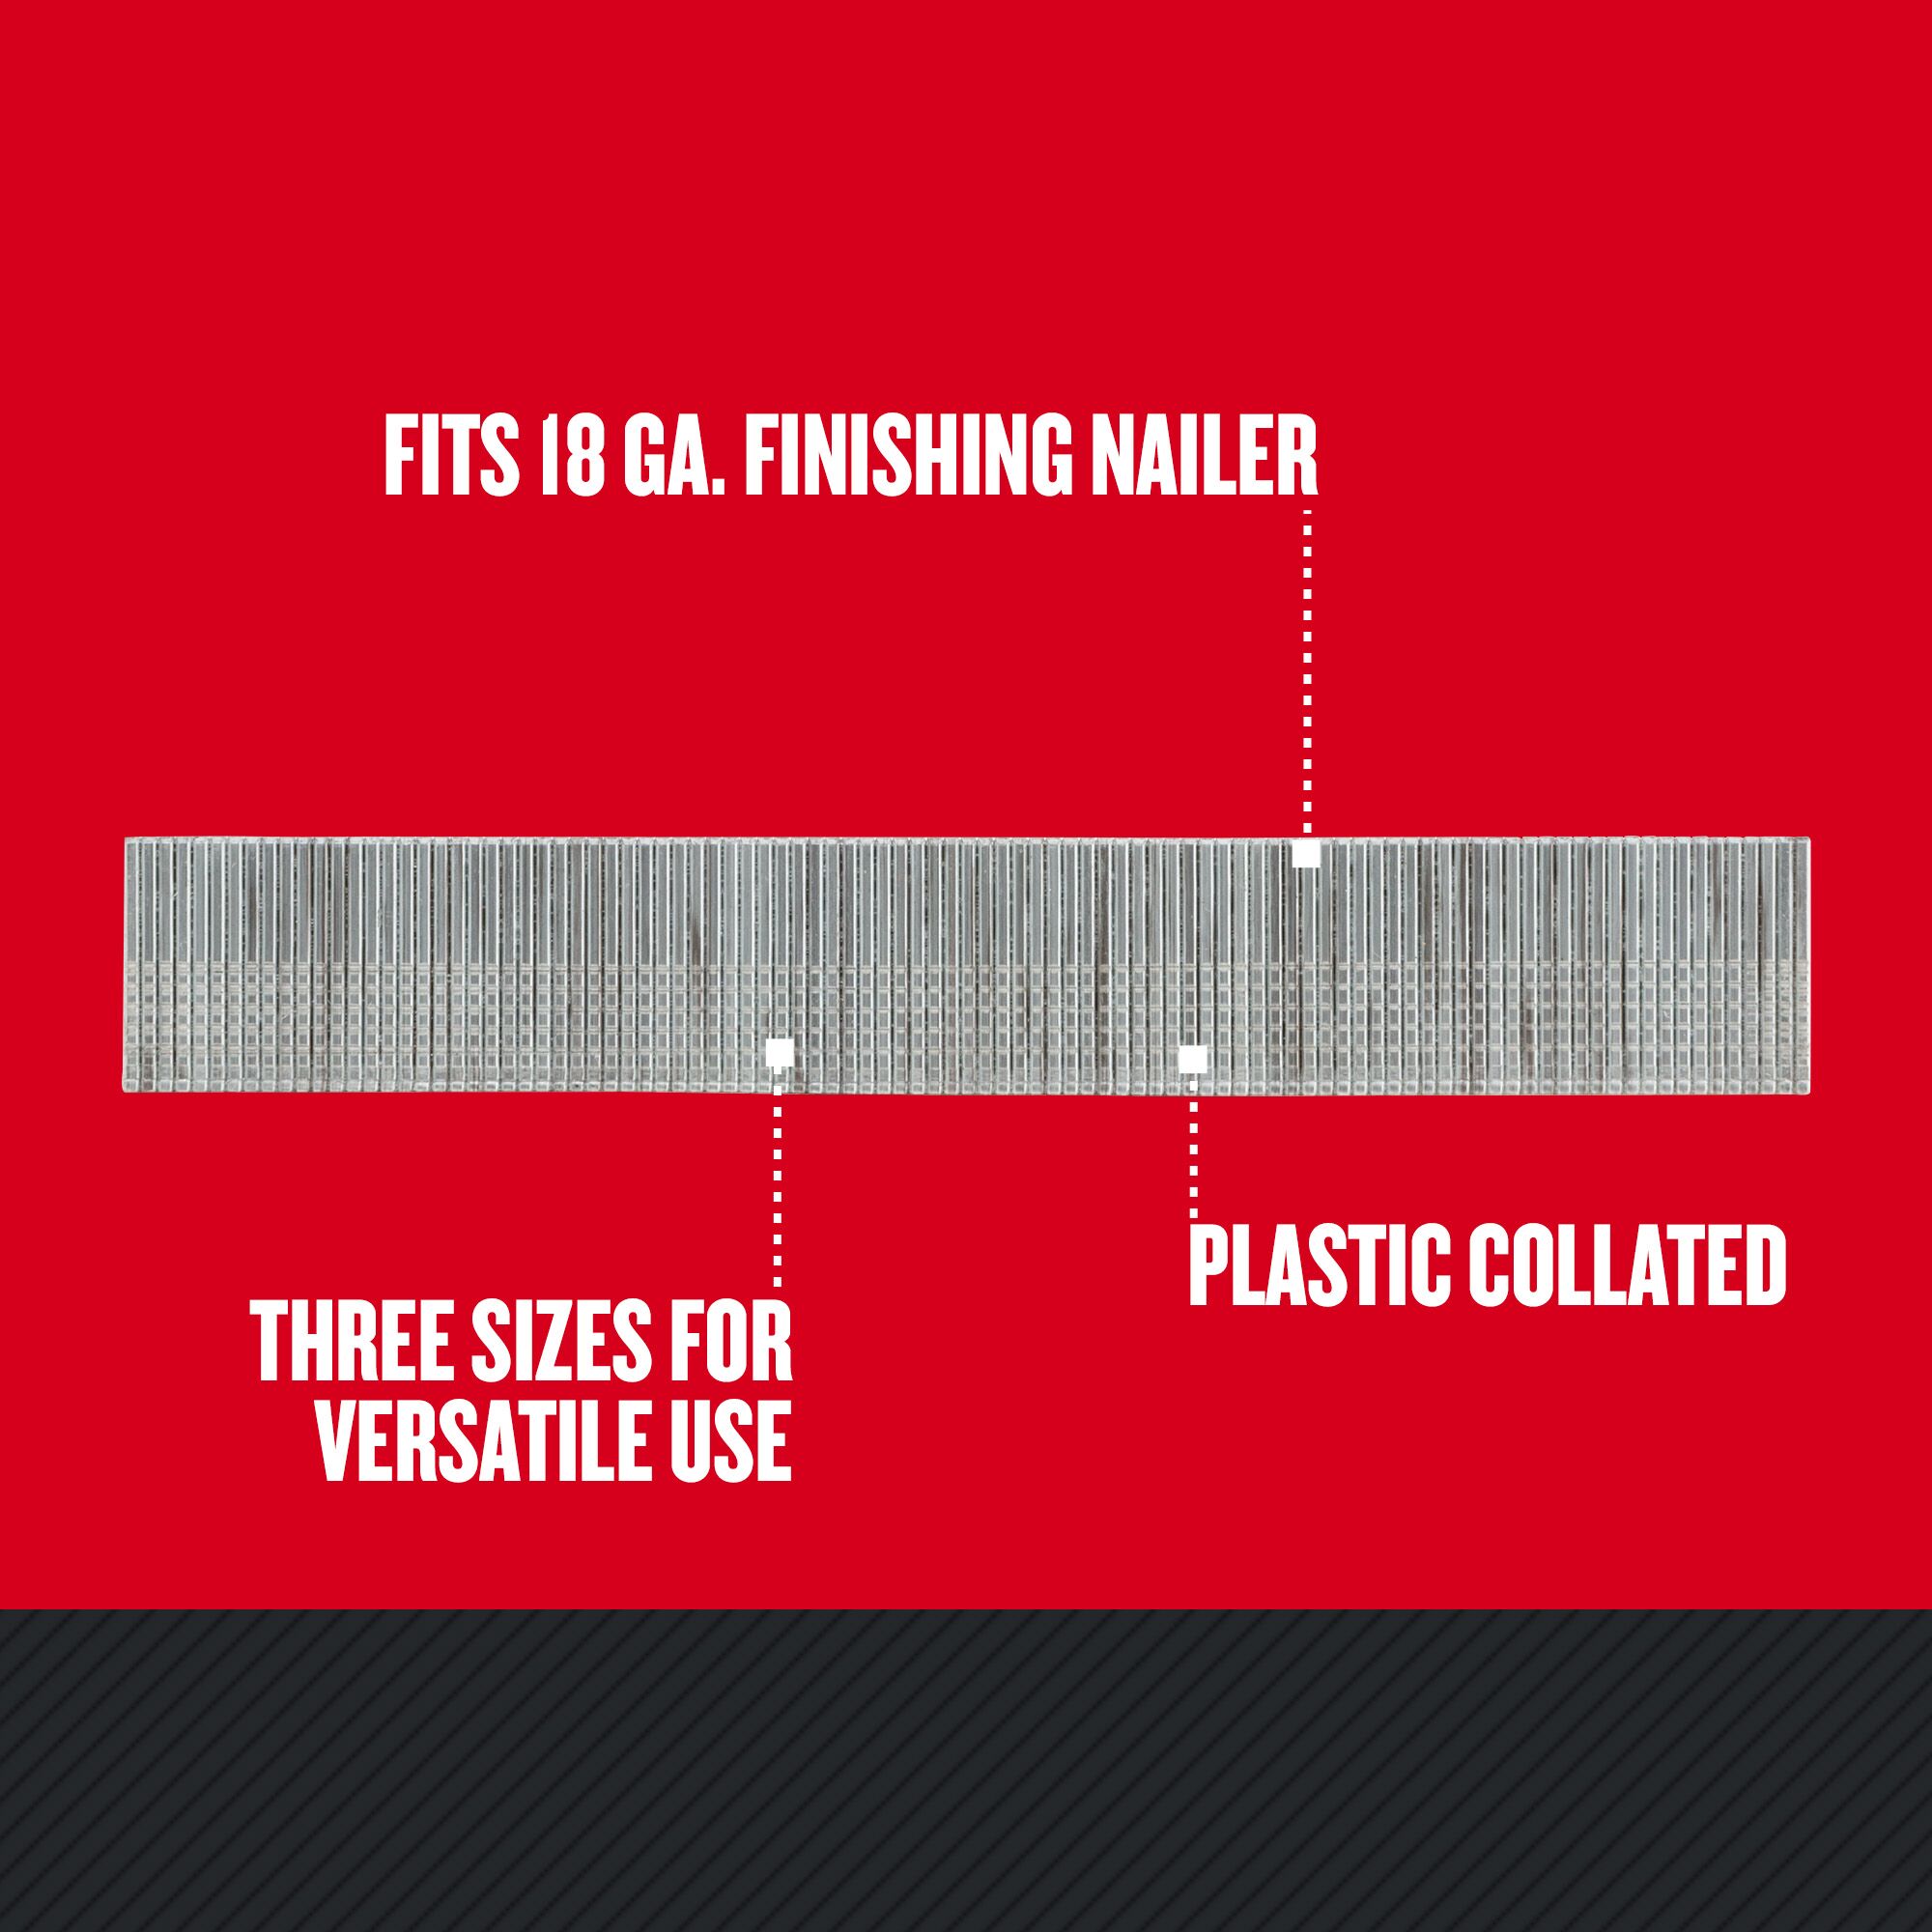 Graphic of CRAFTSMAN Fasteners: Brad Nails highlighting product features